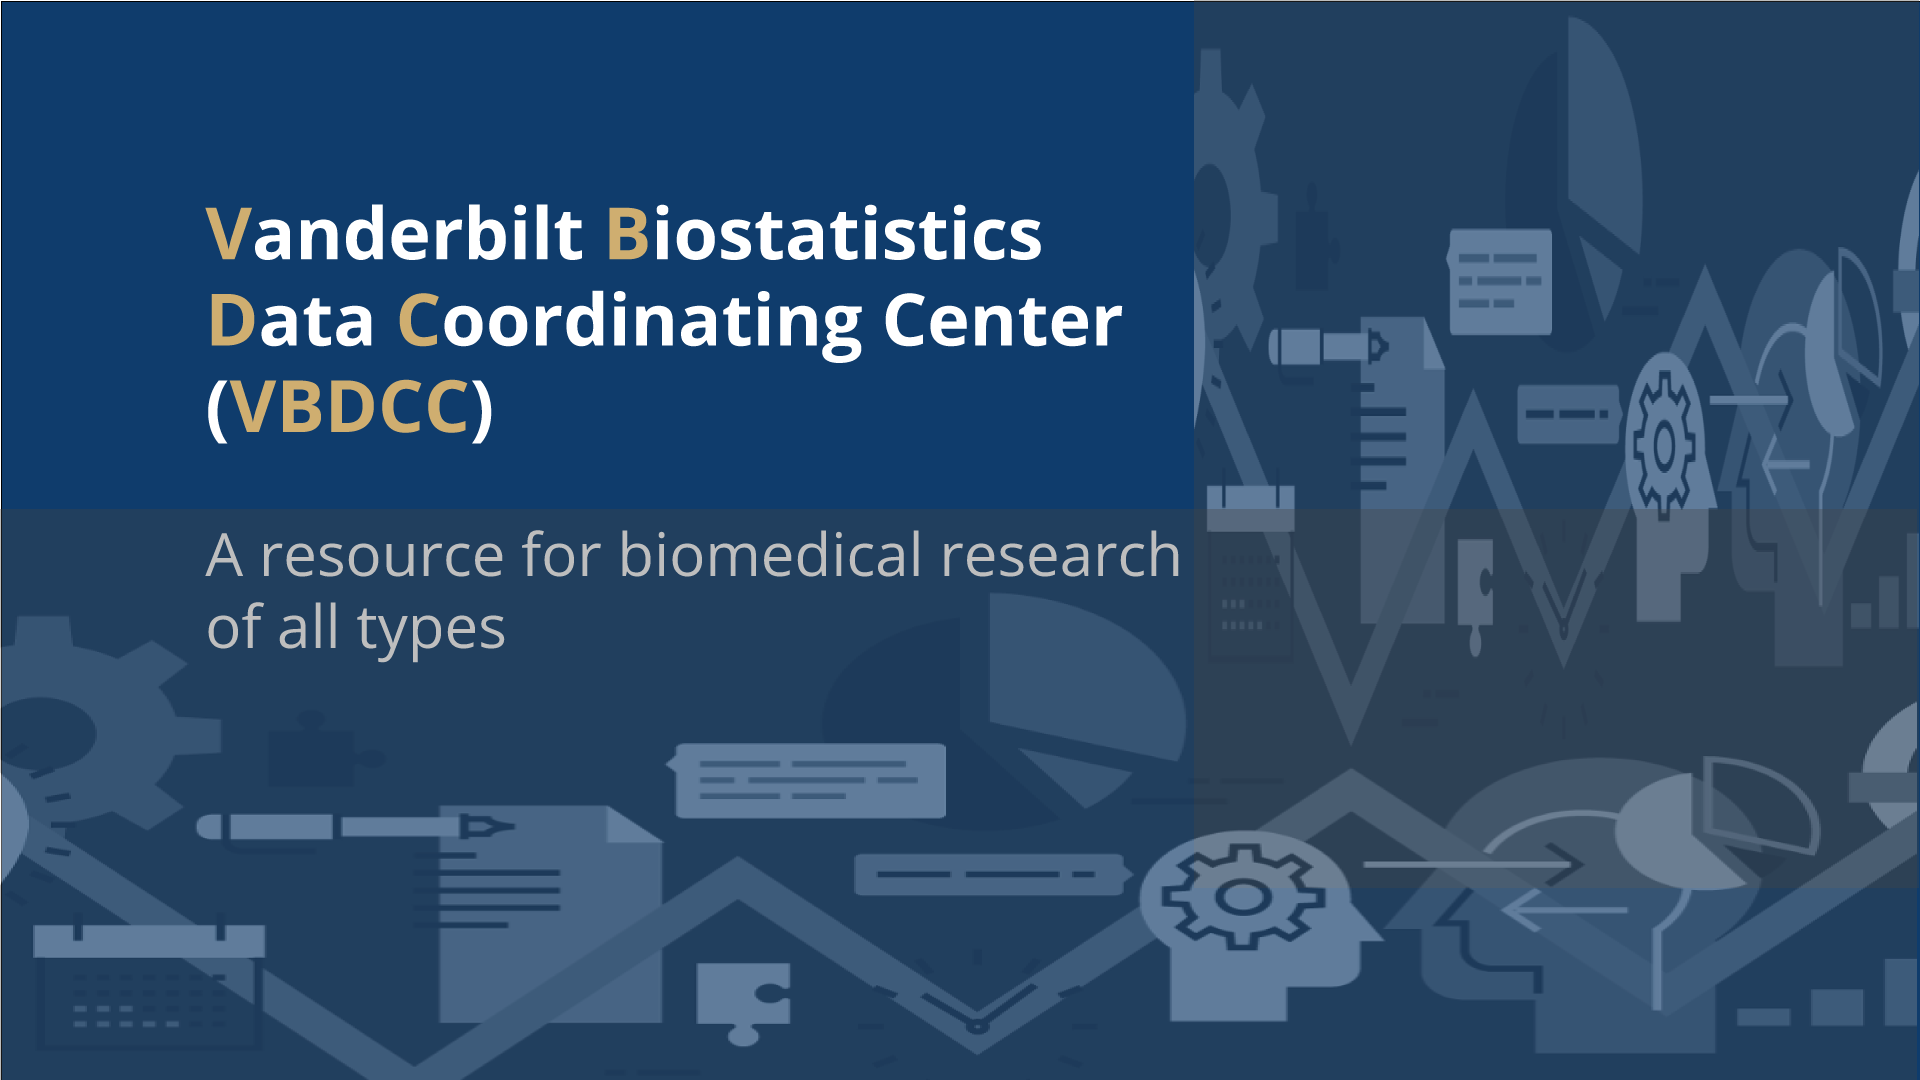 VBDCC title graphic: a resource for biomedical research of all types